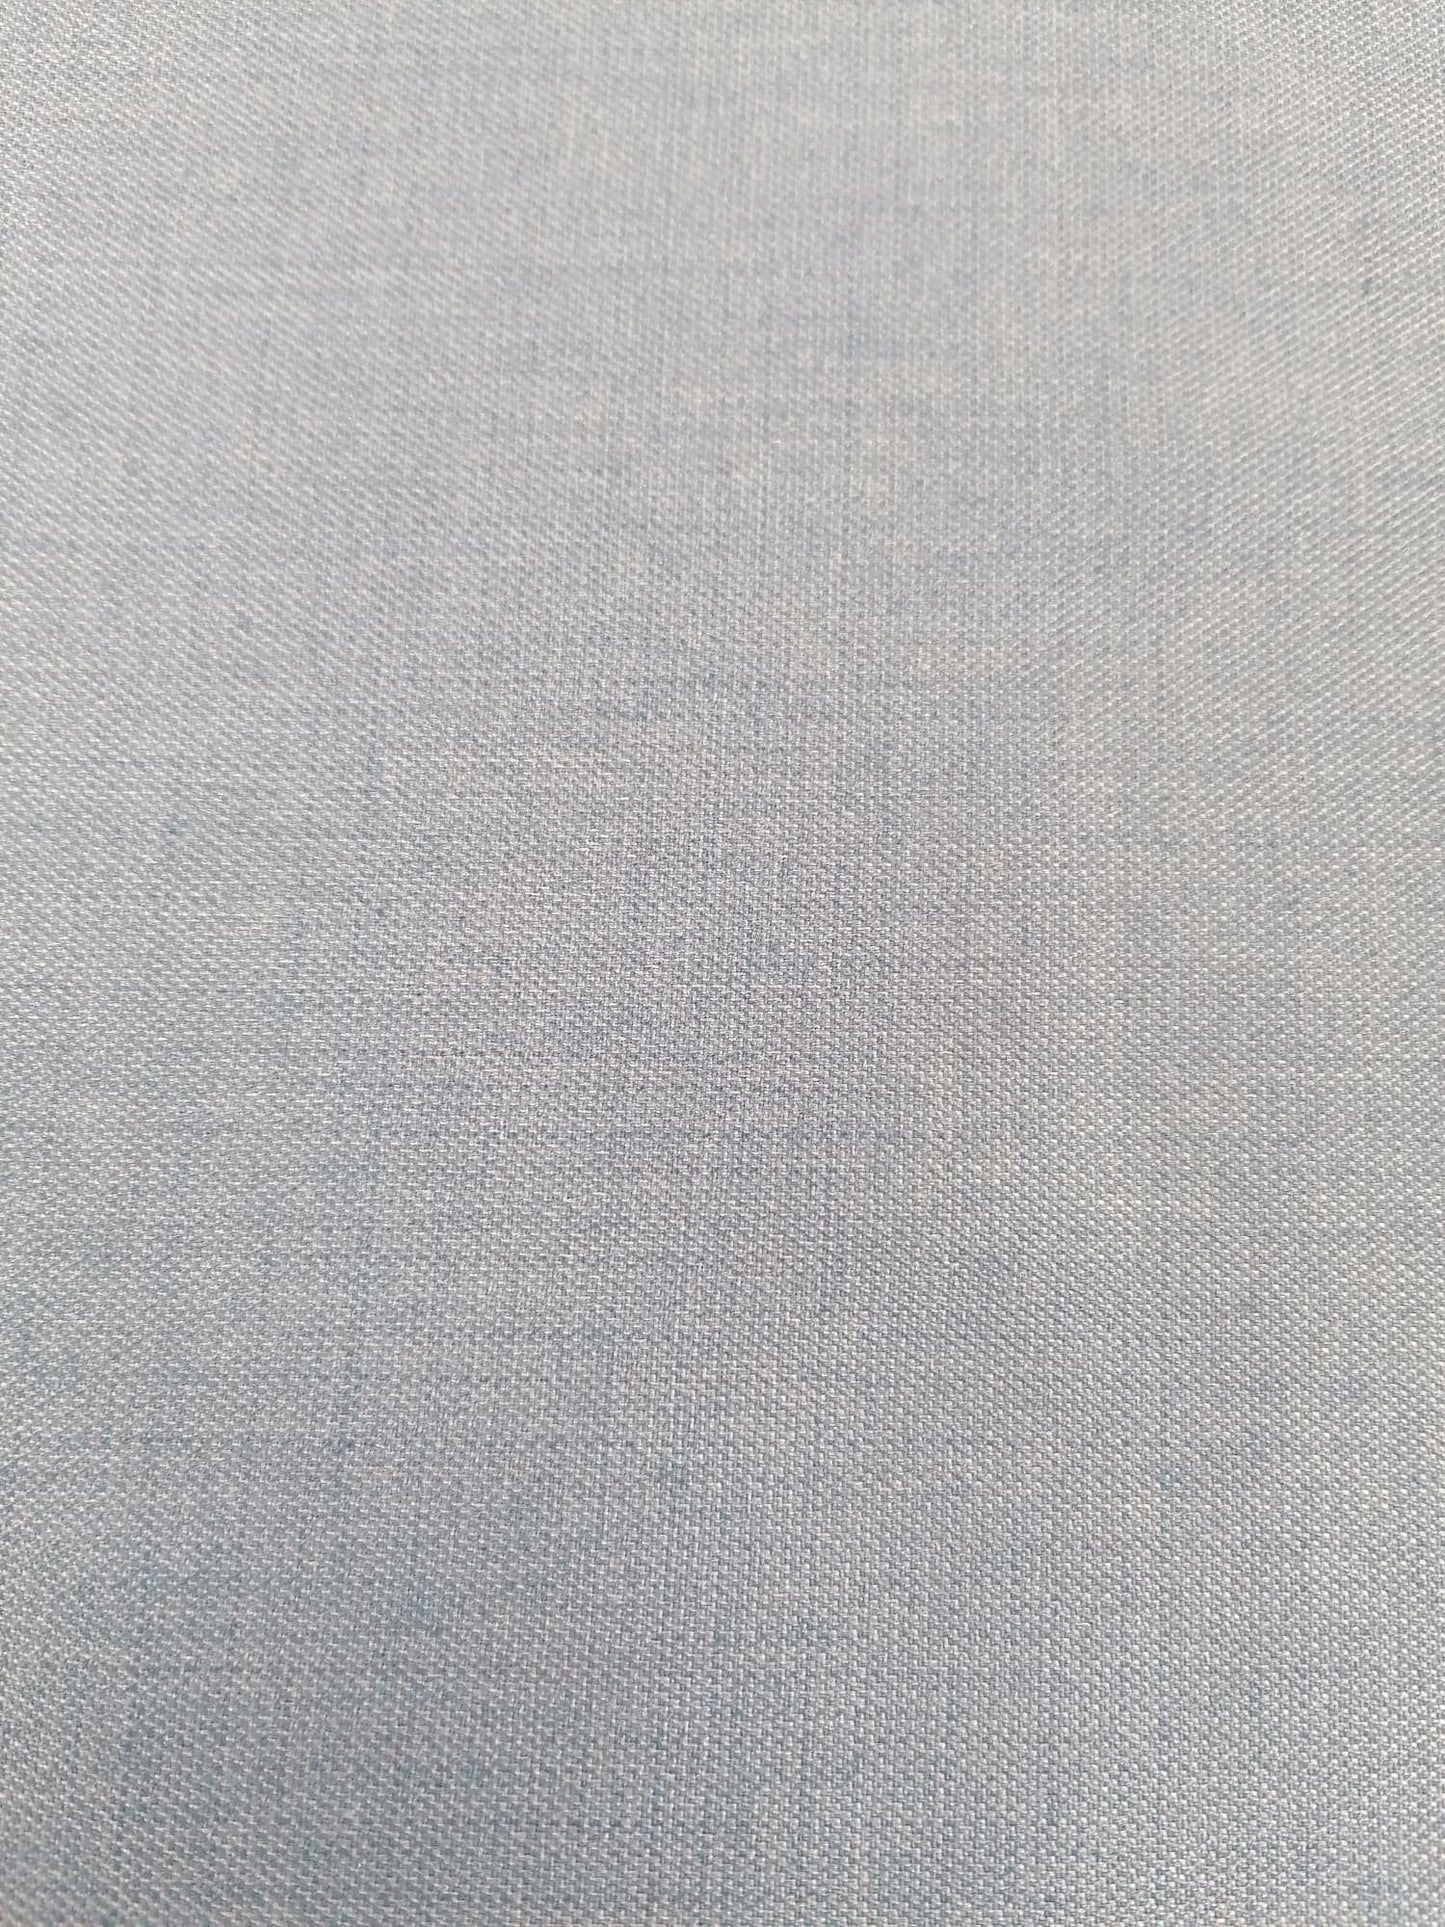 Superfine Wool and Cashmere Suiting - Light Blue - 58" Wide - Sold By the Metre